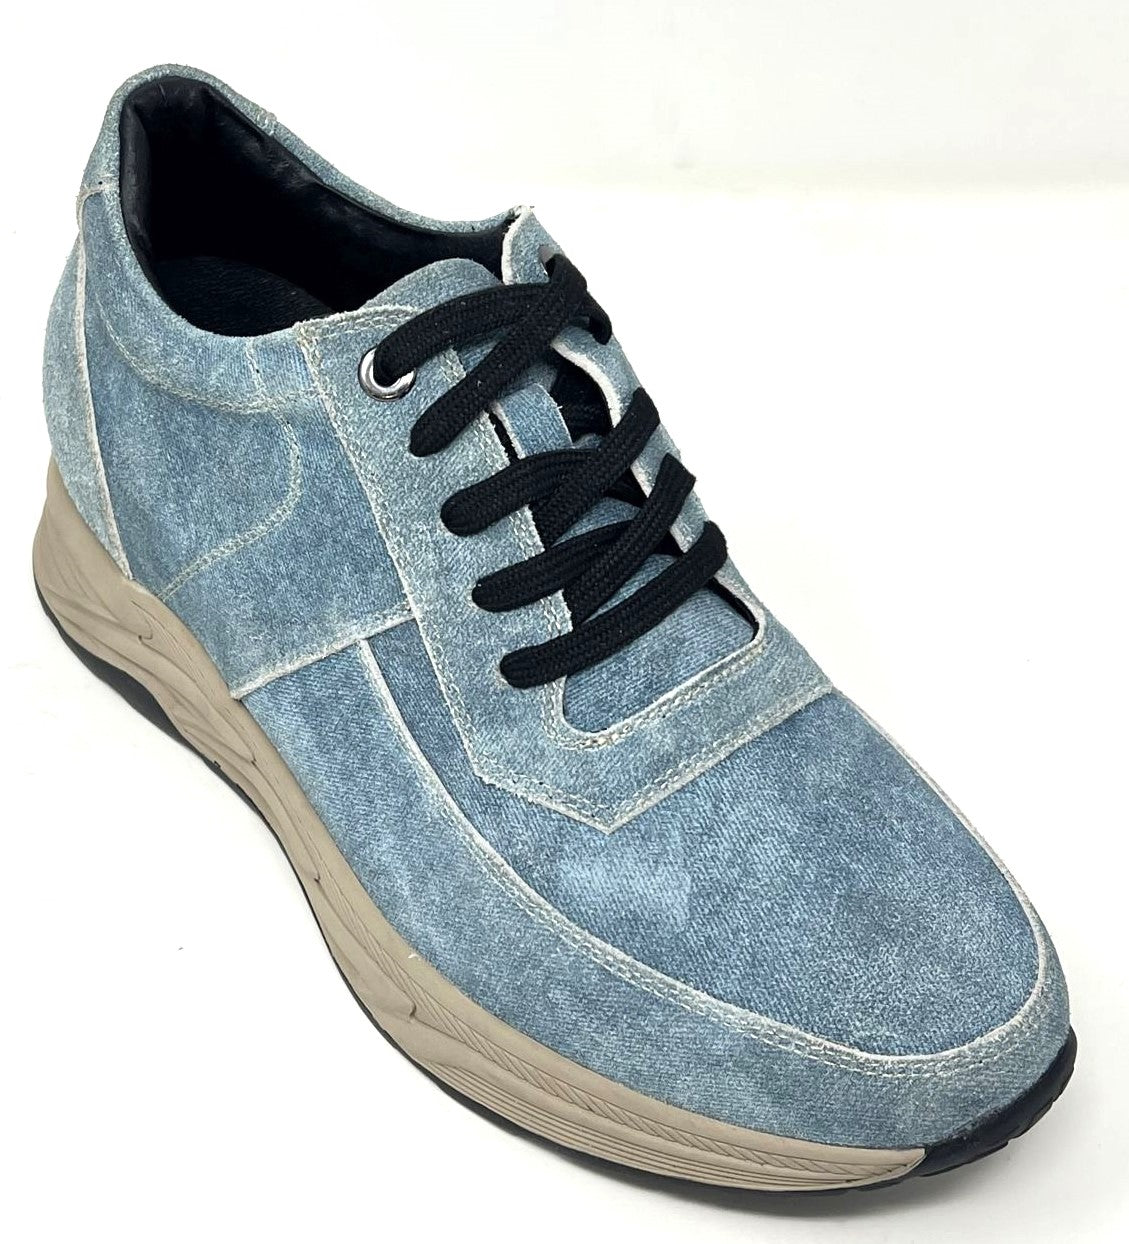 FSD0098 - 3 Inches Taller (Denim Blue) - Size 9 Only